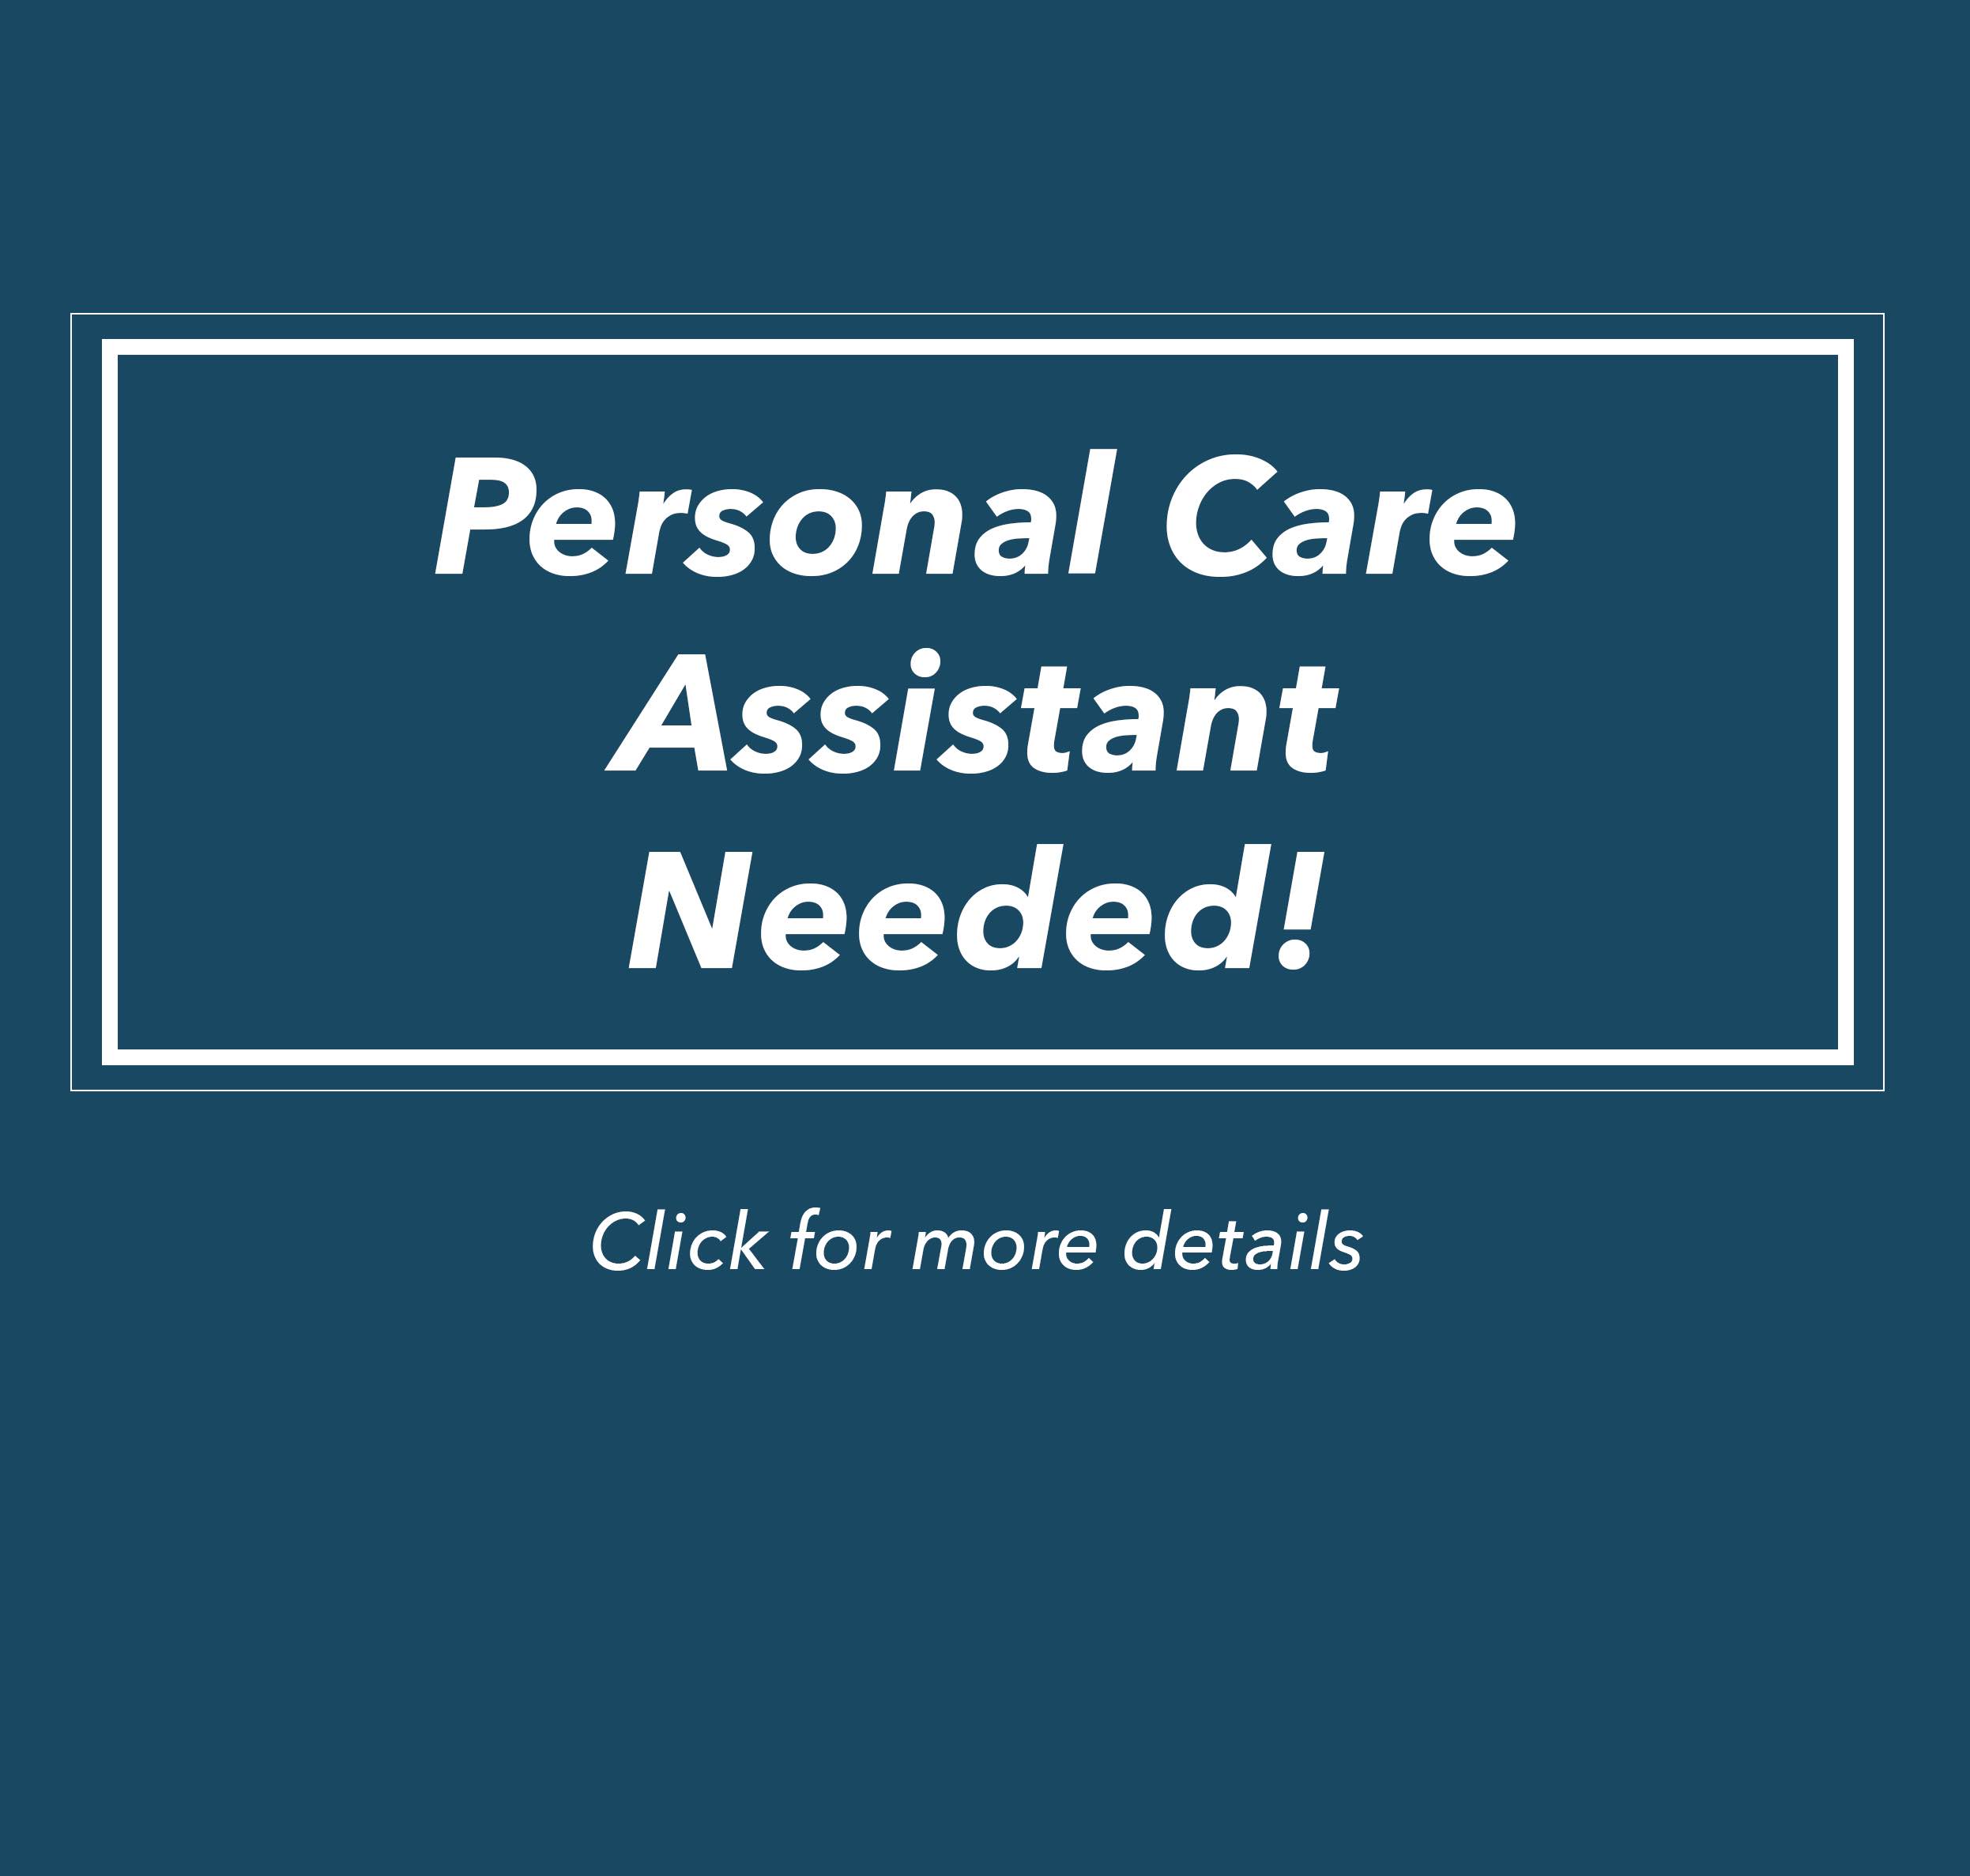 Maggie Gallagher, a case manager on the Early Childhood Team, has a client looking for a Personal Care Assistant. A family is looking for someone to come help with their two-year old with Digeorge’s Syndrome for 7 hours each week at Rutland Mental Health. The child has global developmental delays, she also receives primary nutrition through a G-tube. An important note is to also know that the client's mother also has developmental delays.

The position requires the assistant be available for 7 hours each week getting paid at a rate of $15 an hour.

More details will be provided before an interview occurs, please contact her using the following information if you are interested in learning more:

Maggie Gallagher

Therapeutic Case Manager

Early Childhood Services

Rutland Mental Health

Cell: 802-282-6694

Office: 802-786-7383